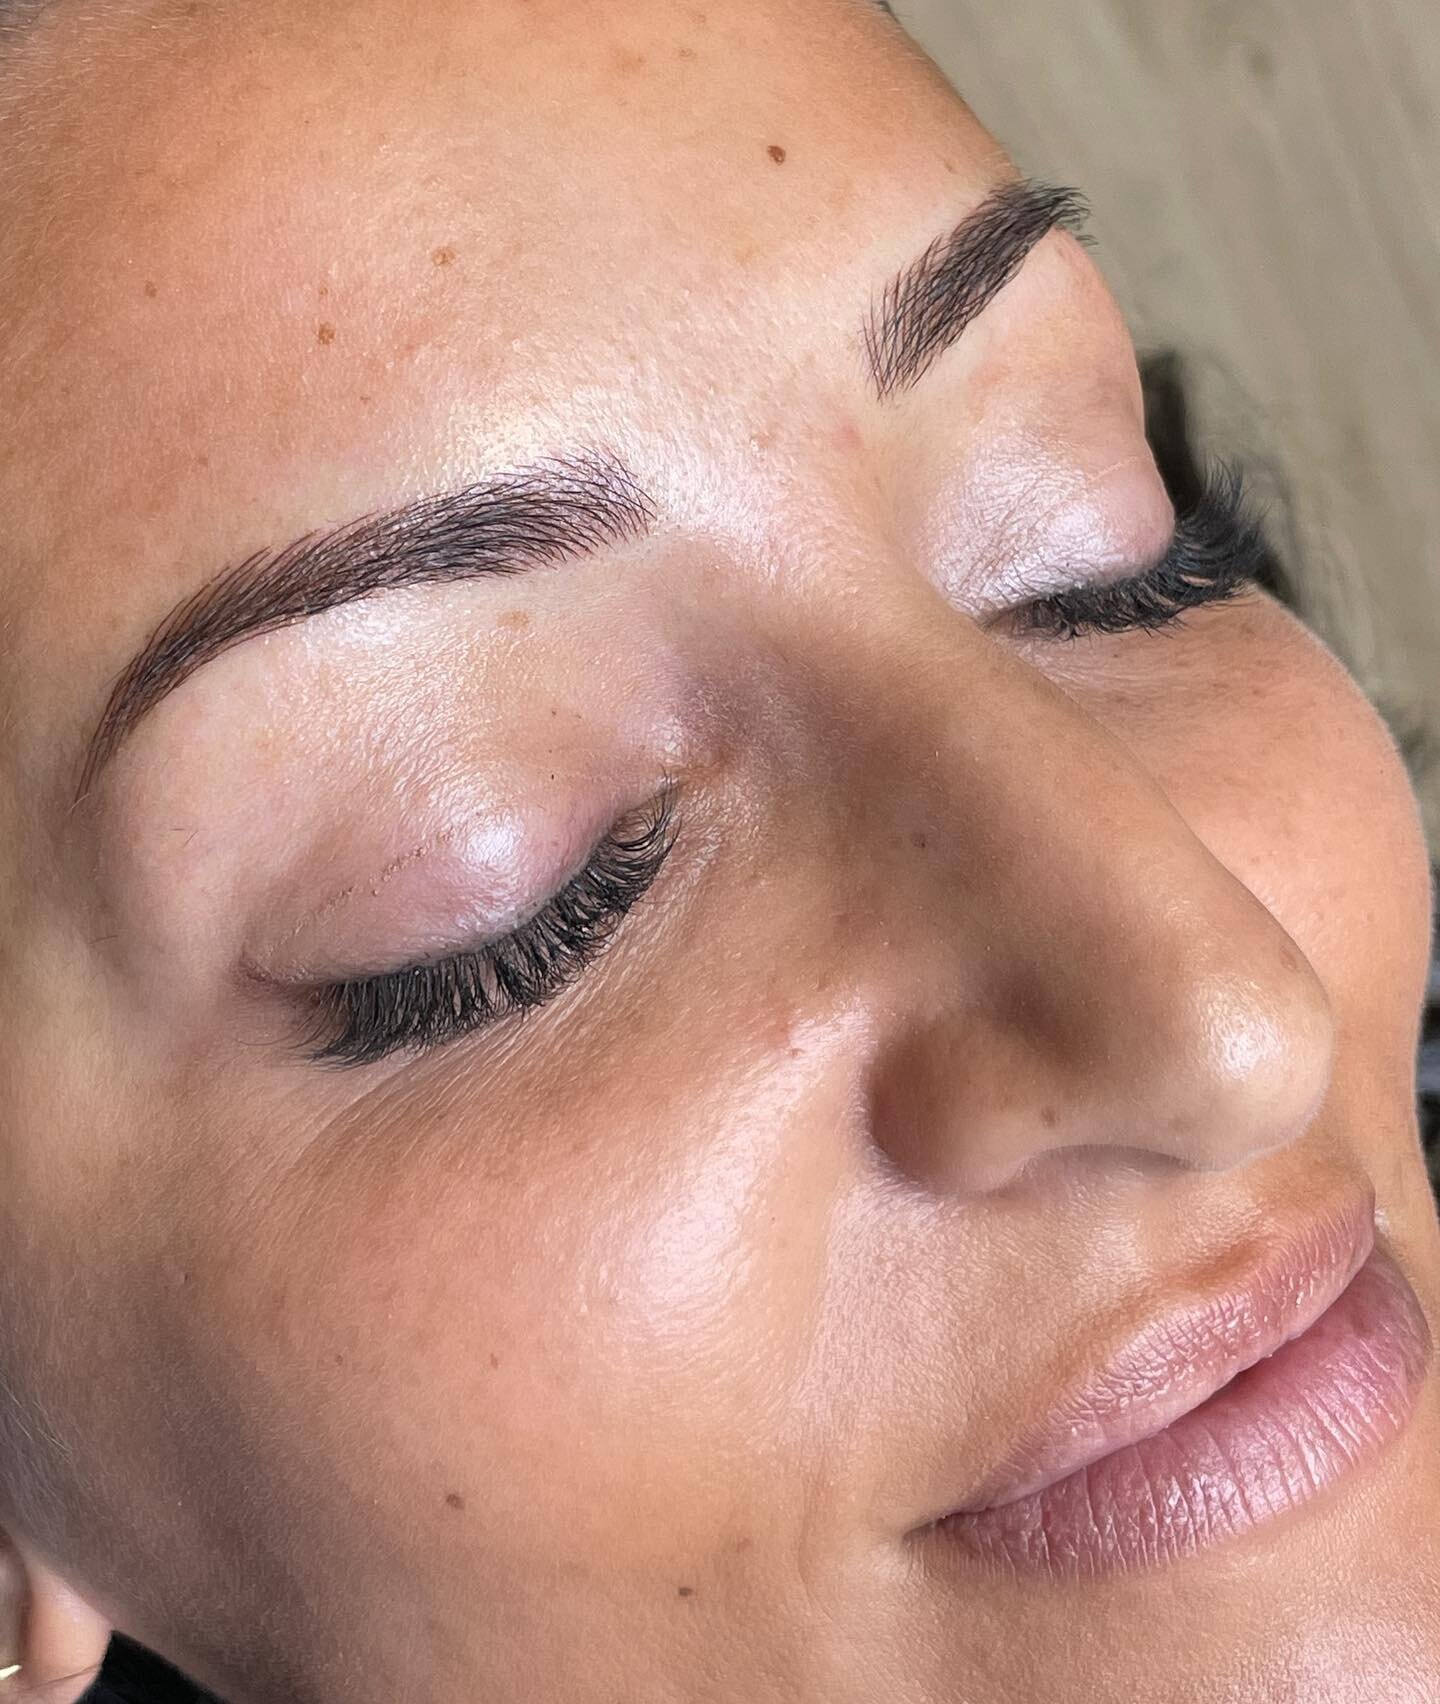 Beautiful microblading results 🤍 📅 To book an appointment, please go to https://www.domicroblading.com, or message us your full name, phone number, email address, a preferred date/time and your requested service.